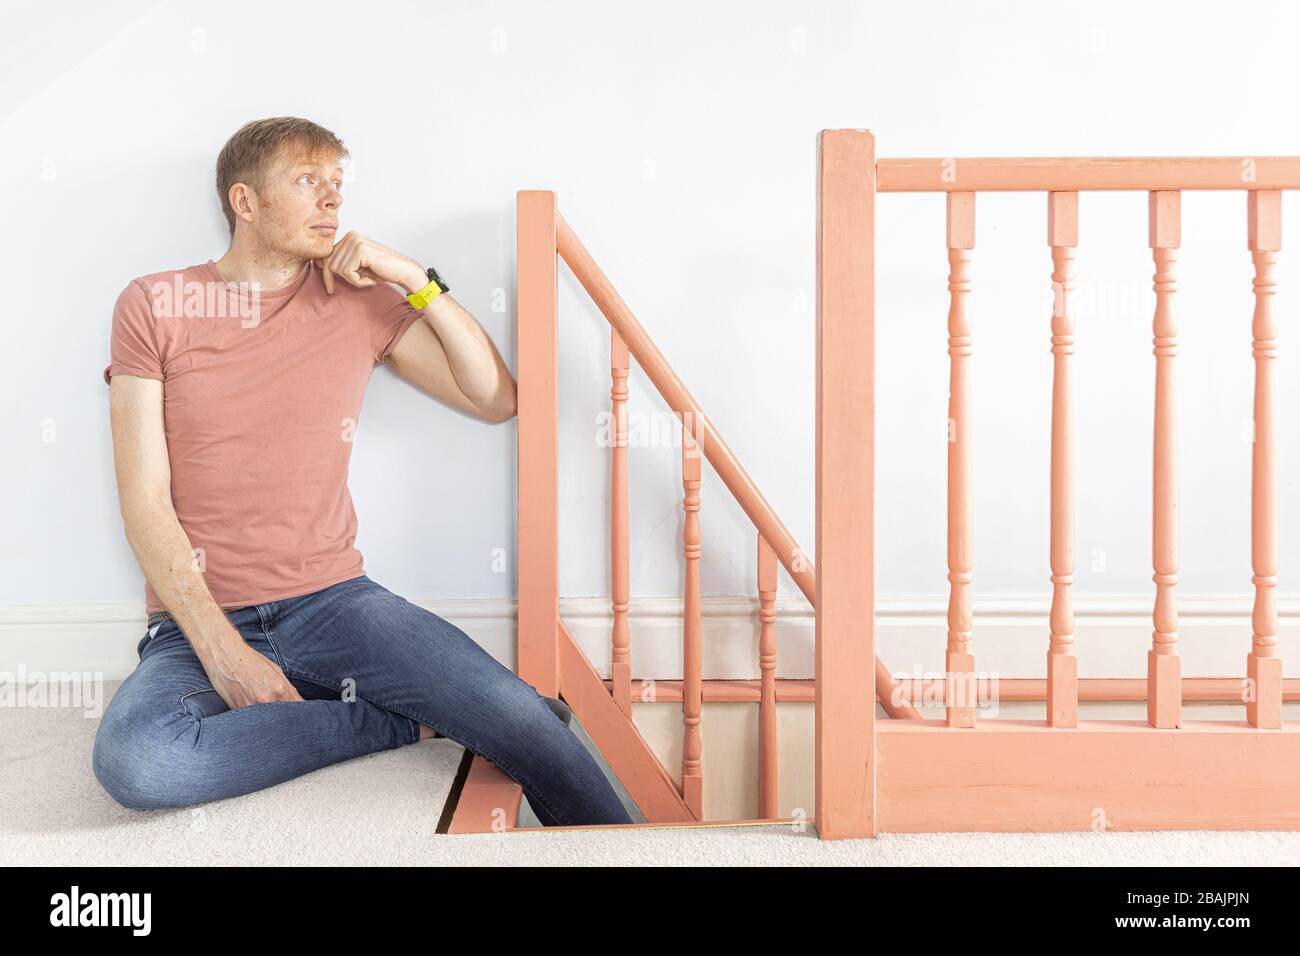 man in pink t-shirt sitting down leaning on banister thinking on top of the stairs Stock Photo